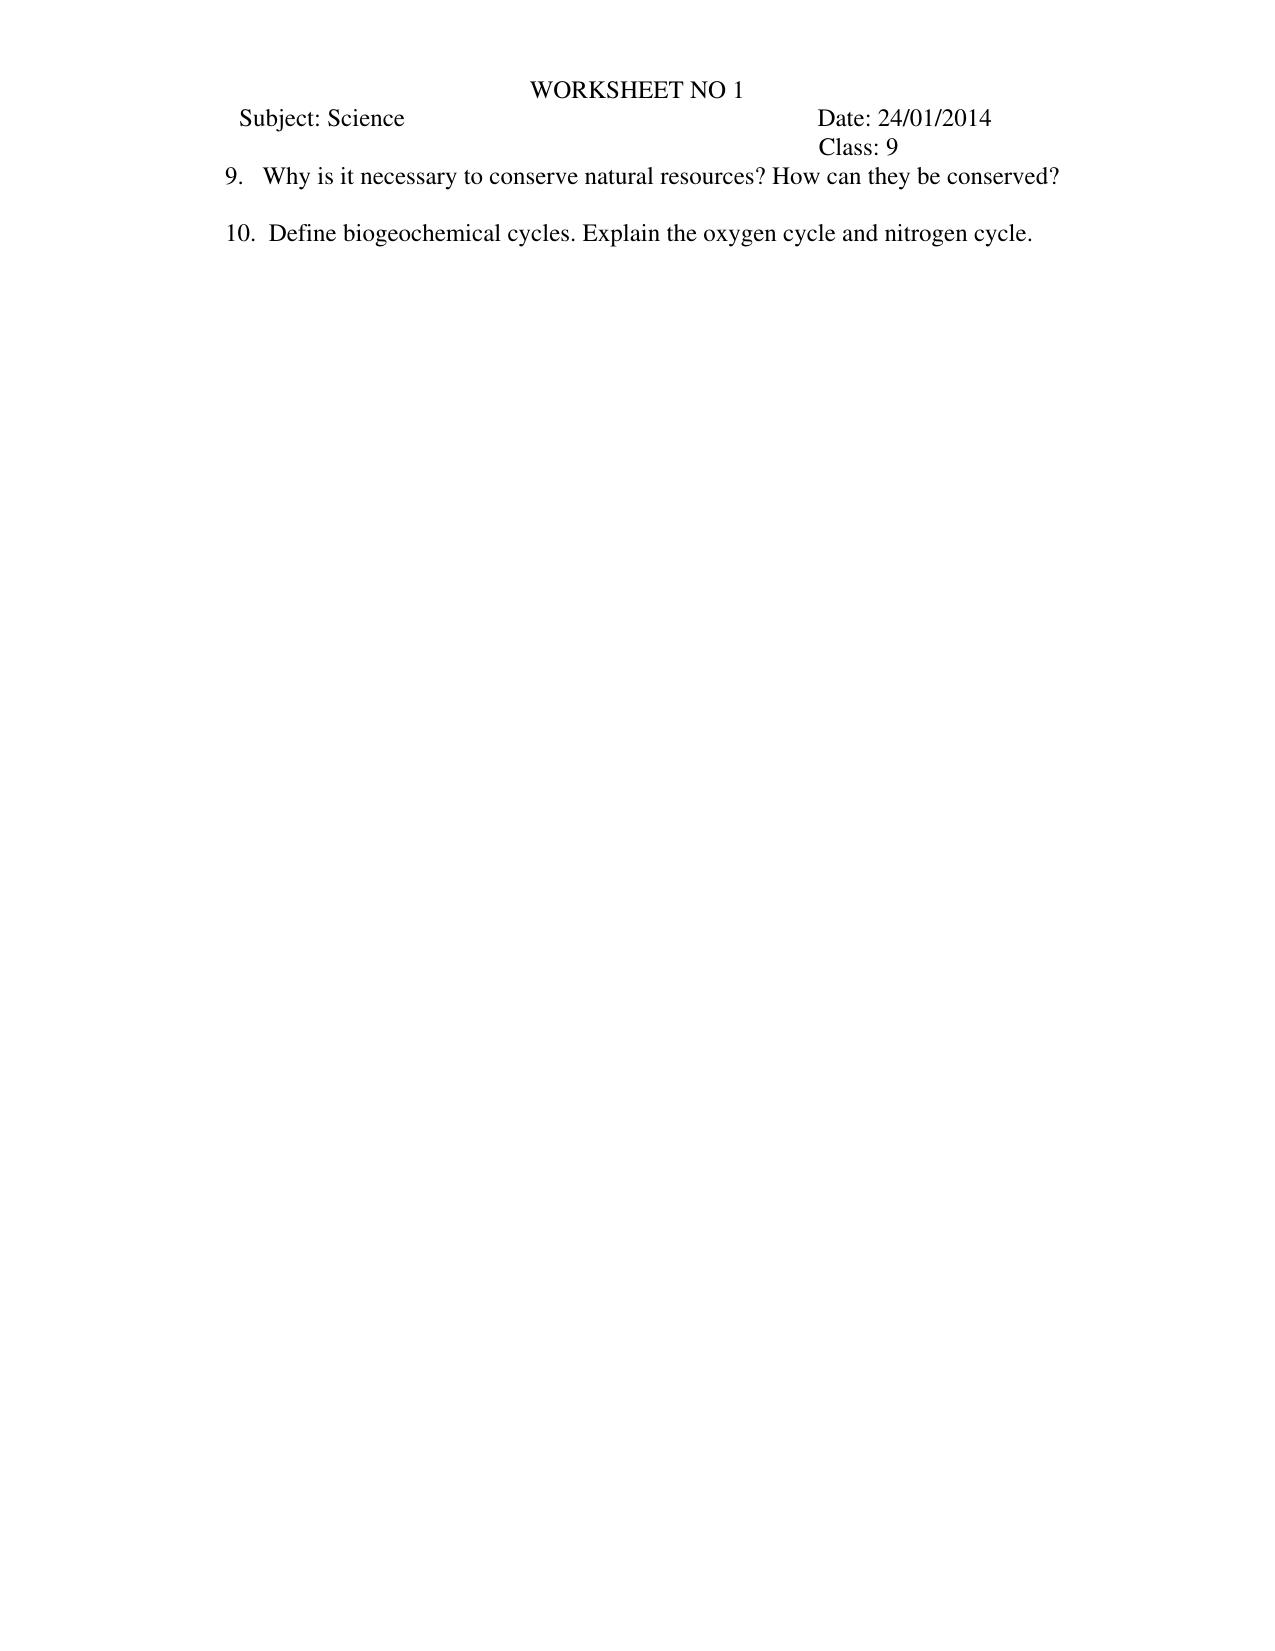 CBSE Worksheets for Class 9 Science Assignment 10 - Page 2